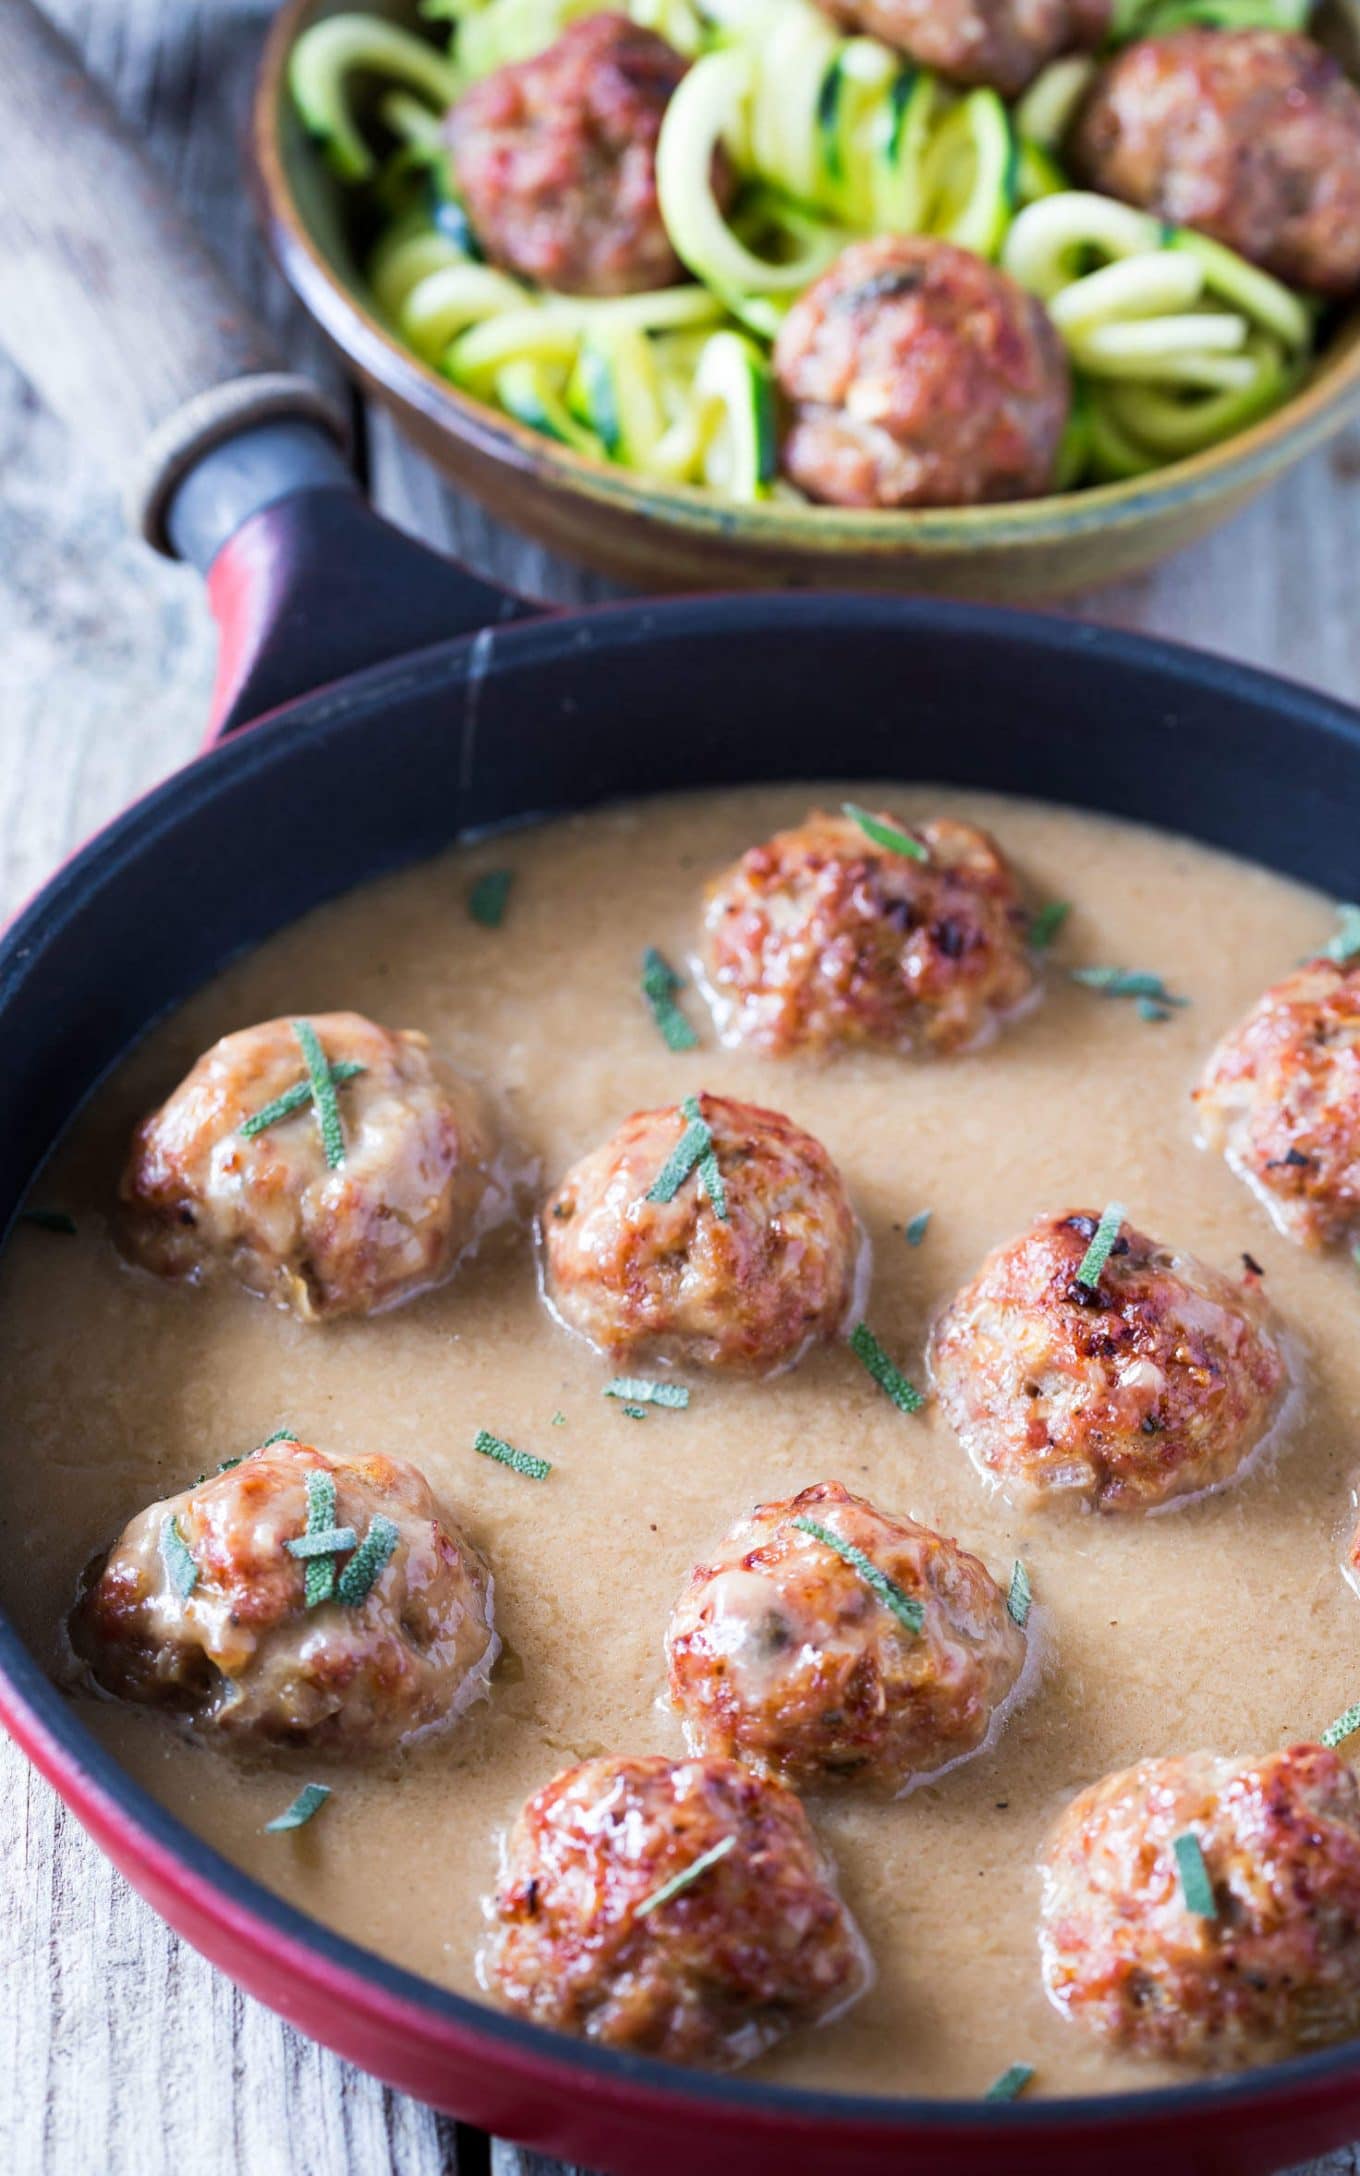 Delicious Paleo Meatballs with Gravy - Whole30 and Gluten Free too!